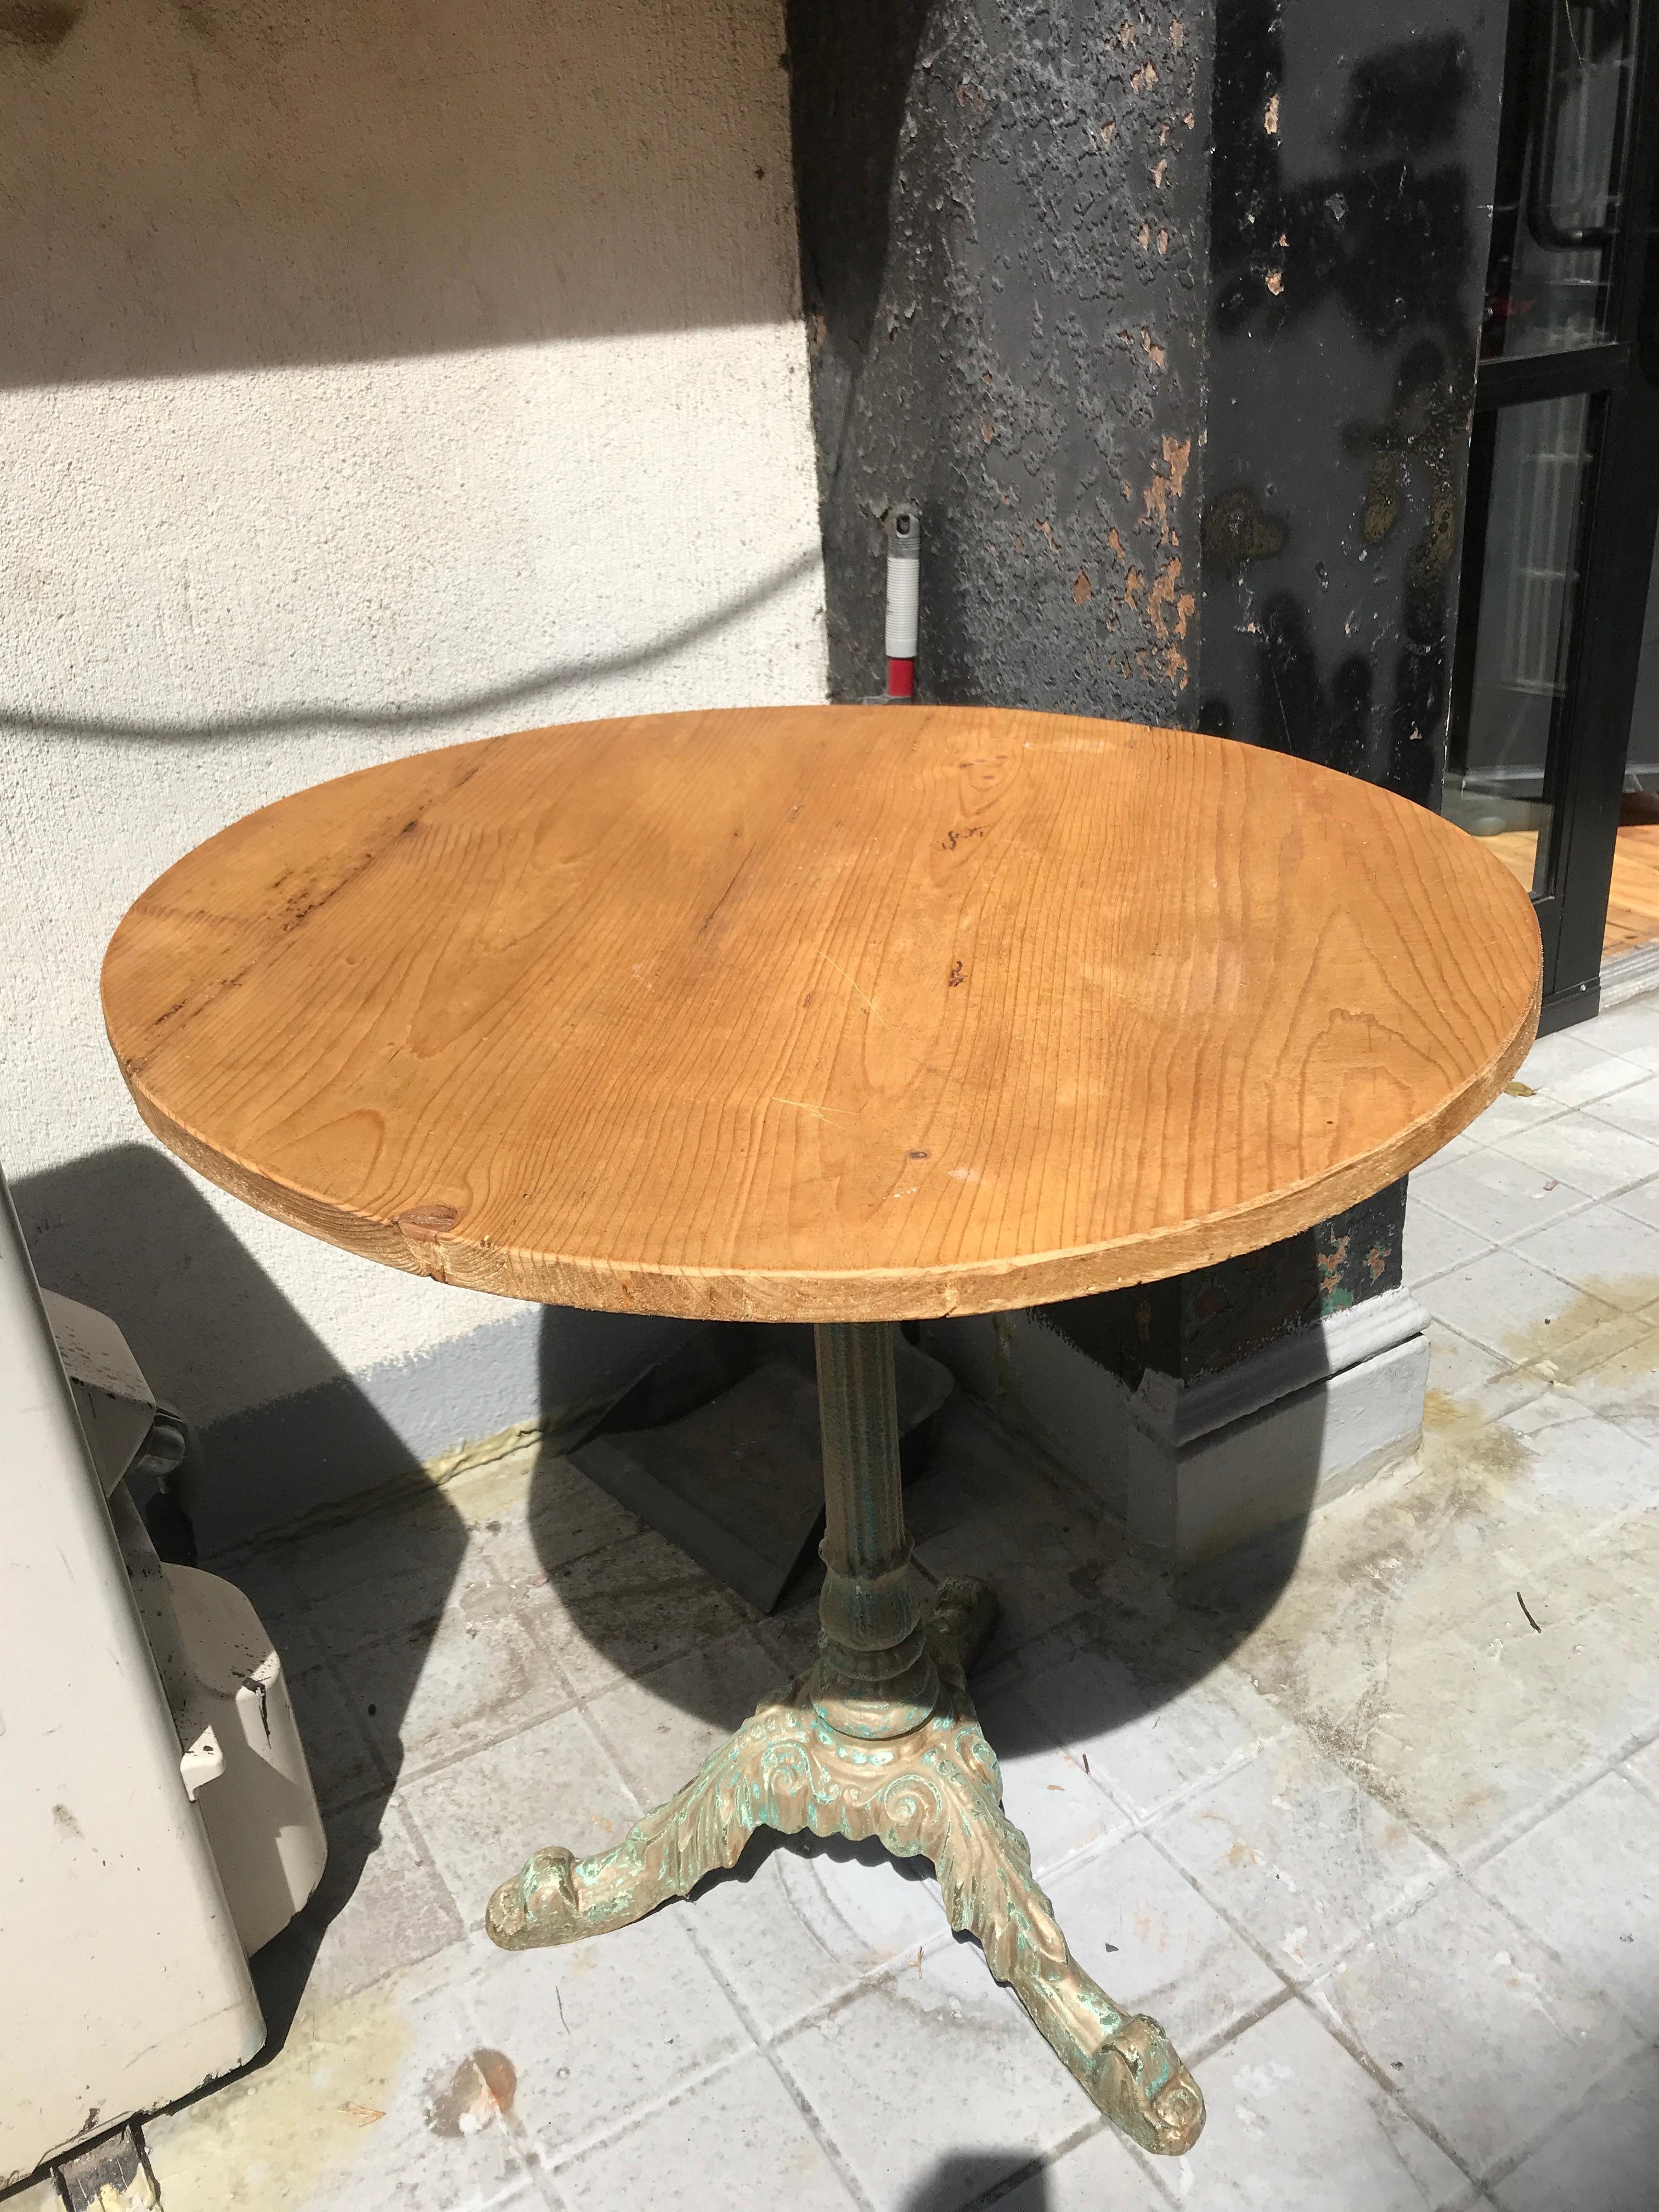 A French mid-20th century patio dining table. This round shaped metal patio table has a wonderfully aged patina and features a round top over a decorative stand. This midcentury table features it's original paint, much of which has been worn with